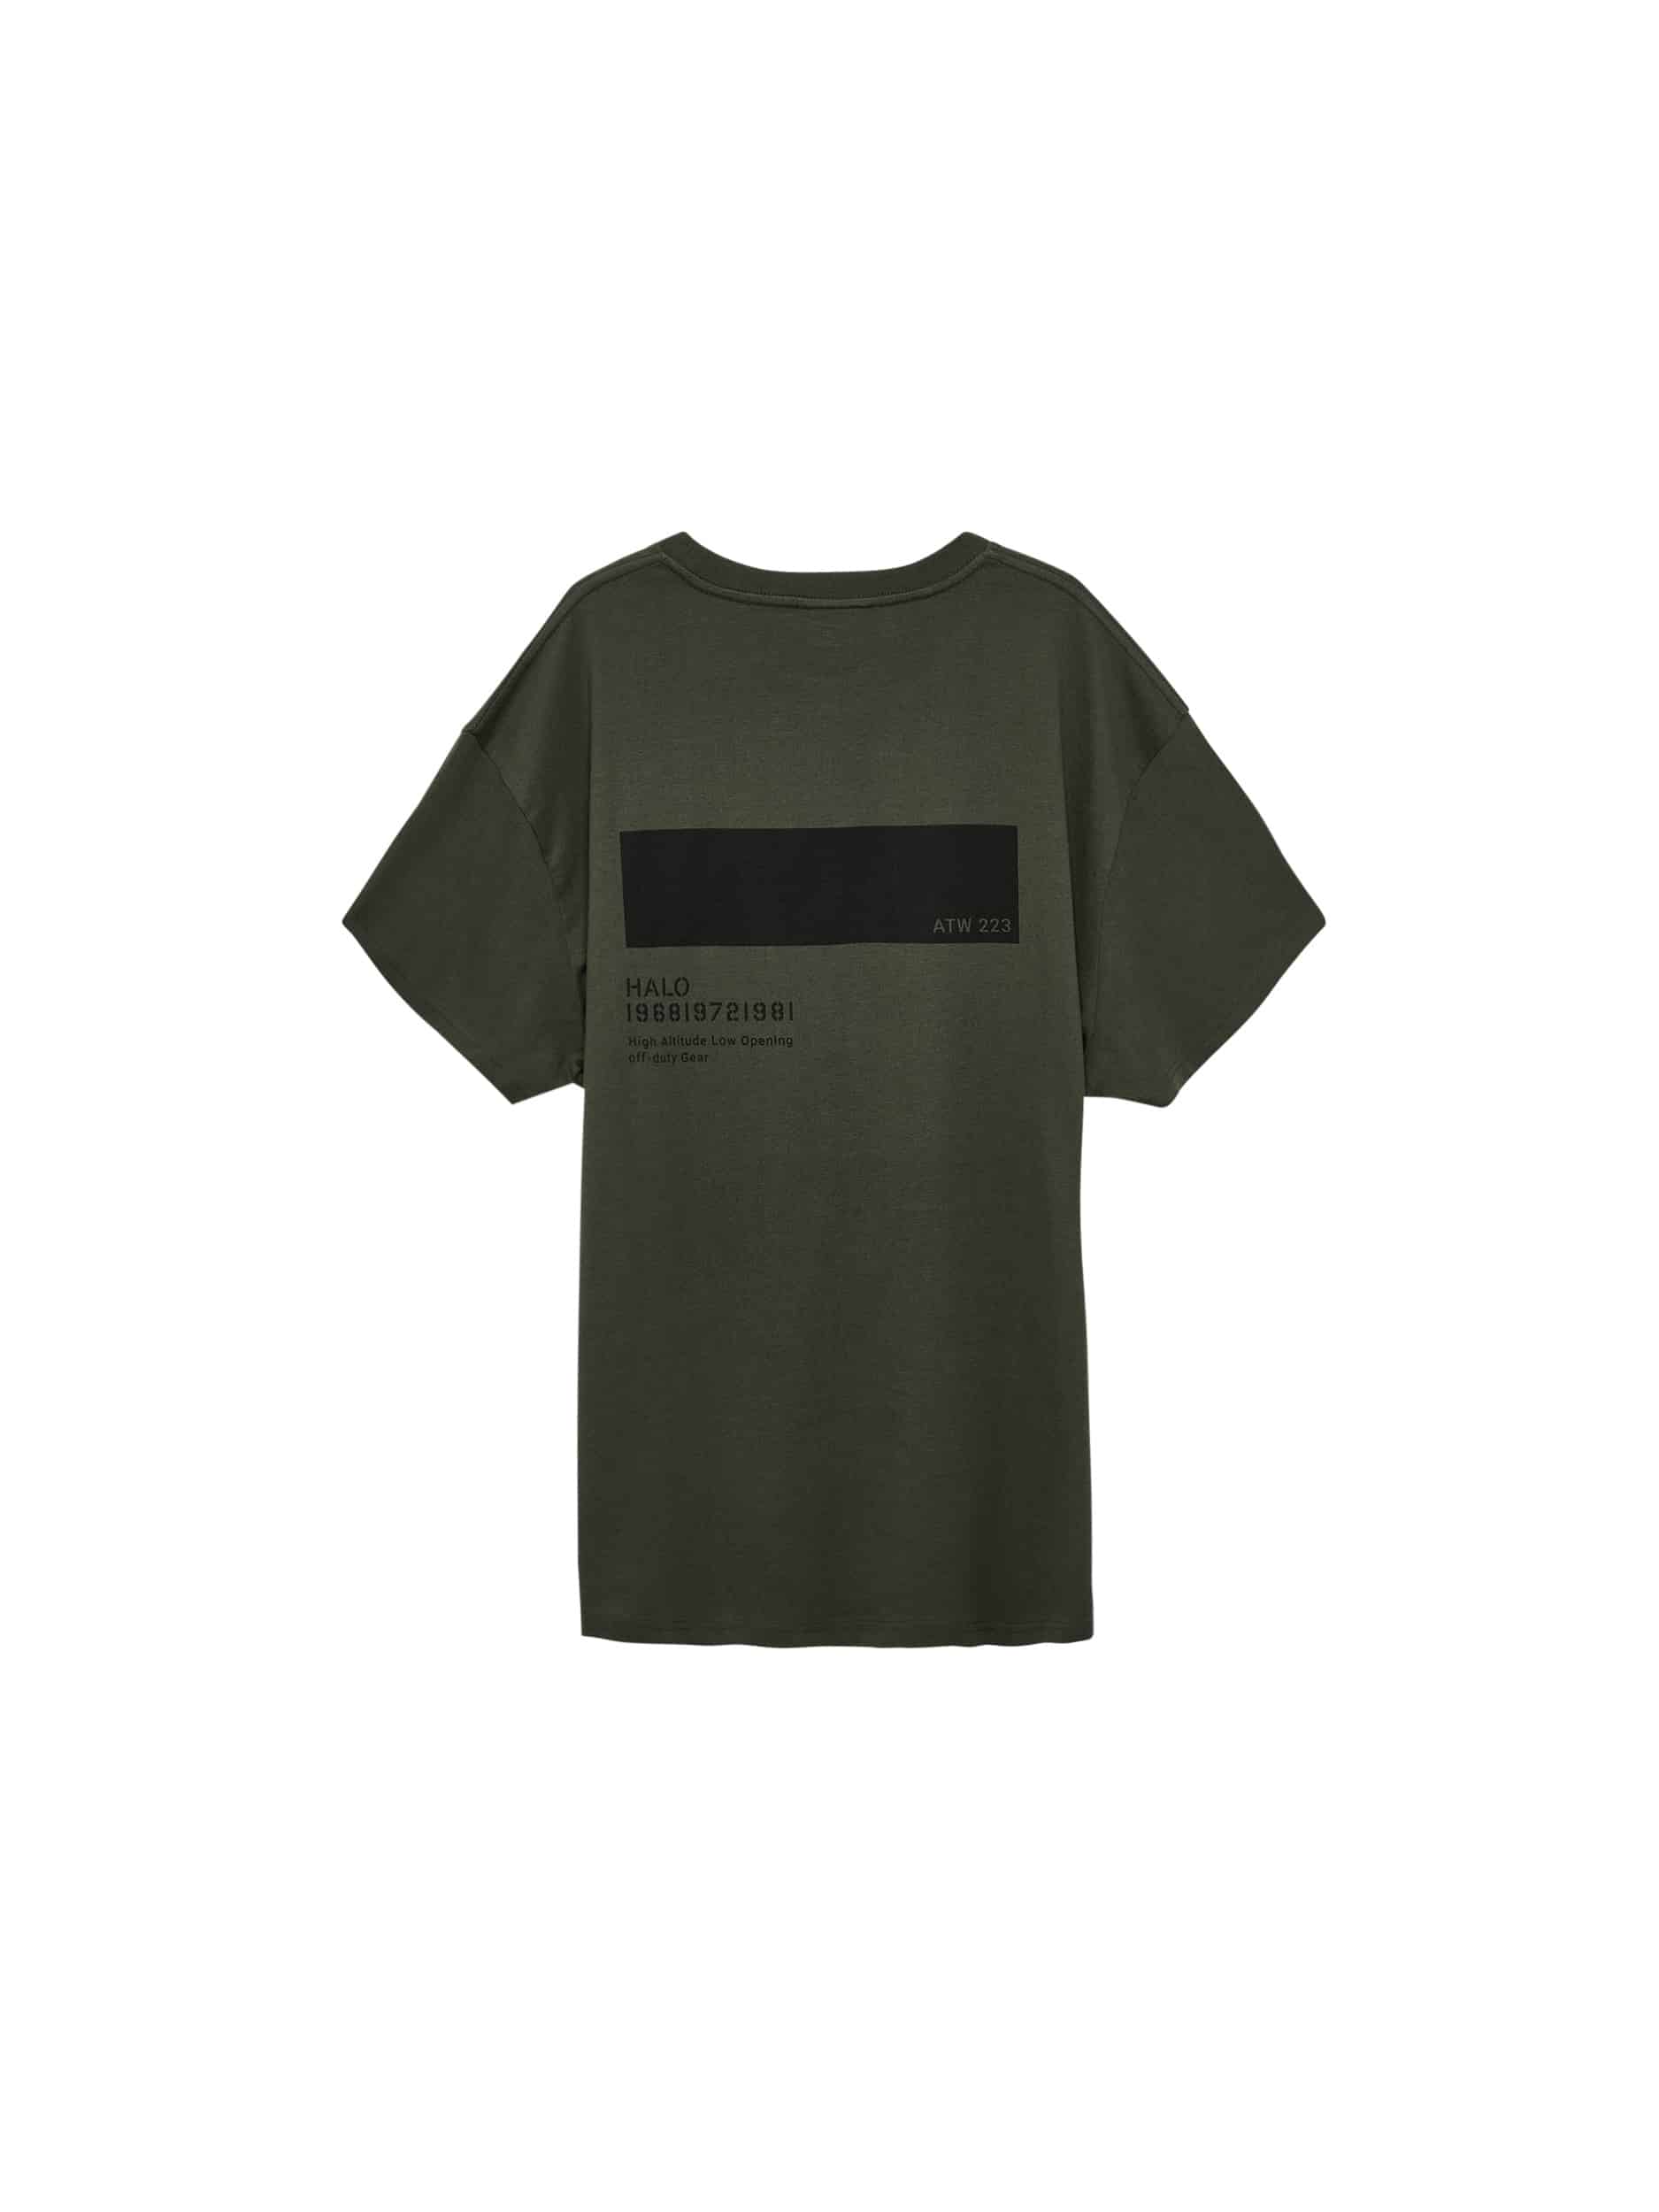 HALO Graphic T-Shirt - Forest Night Back